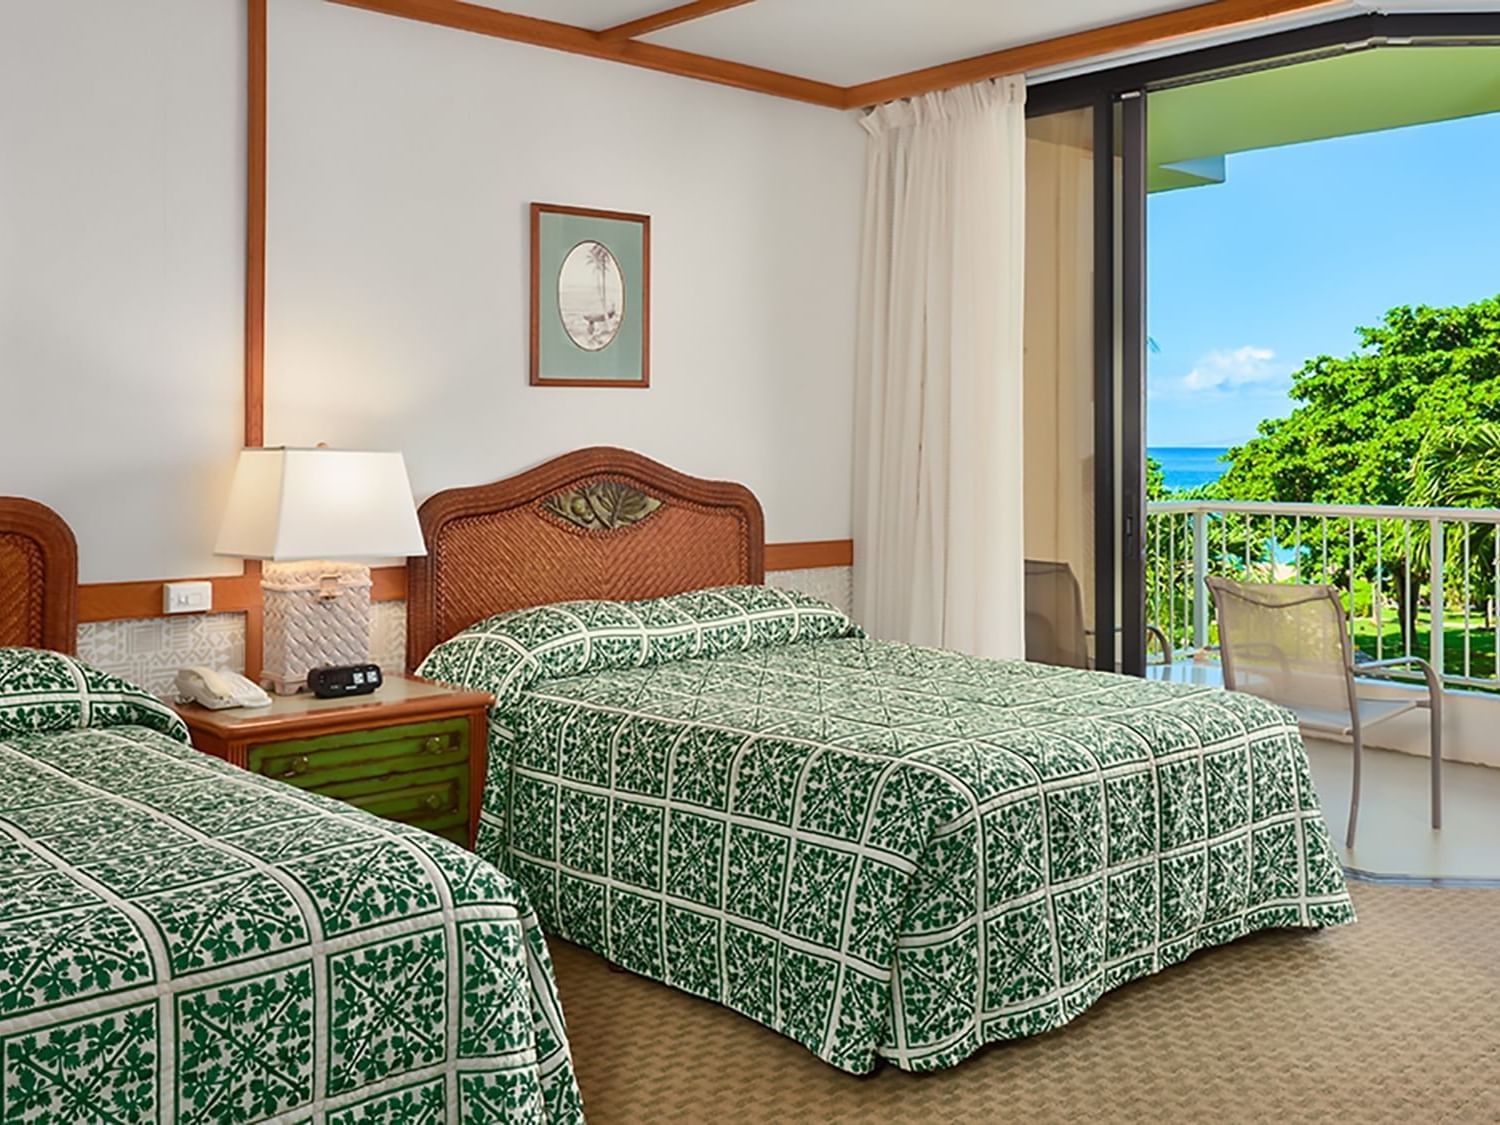 two beds in hotel room with view of tropical setting